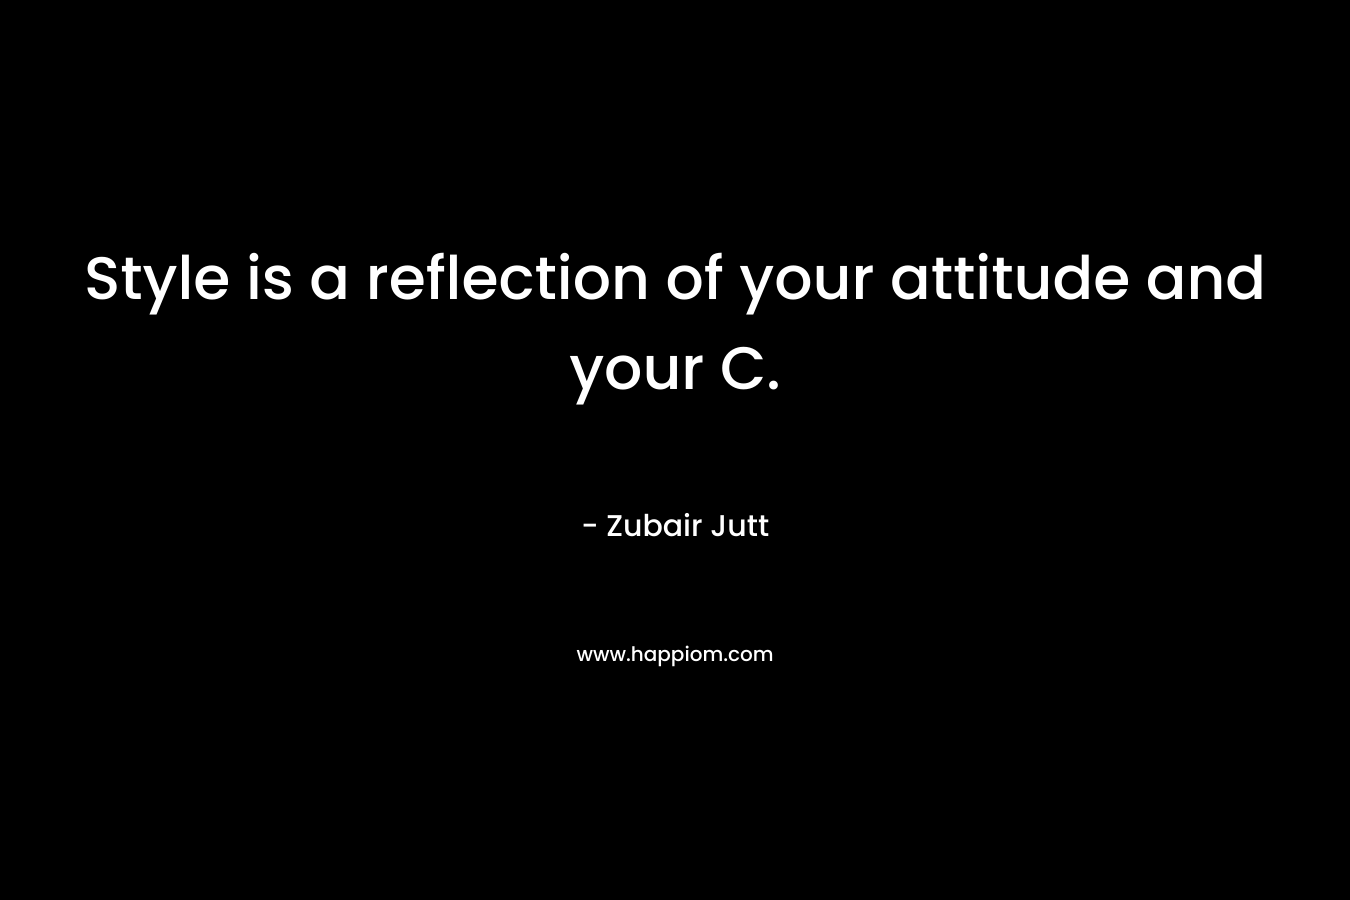 Style is a reflection of your attitude and your C. – Zubair Jutt